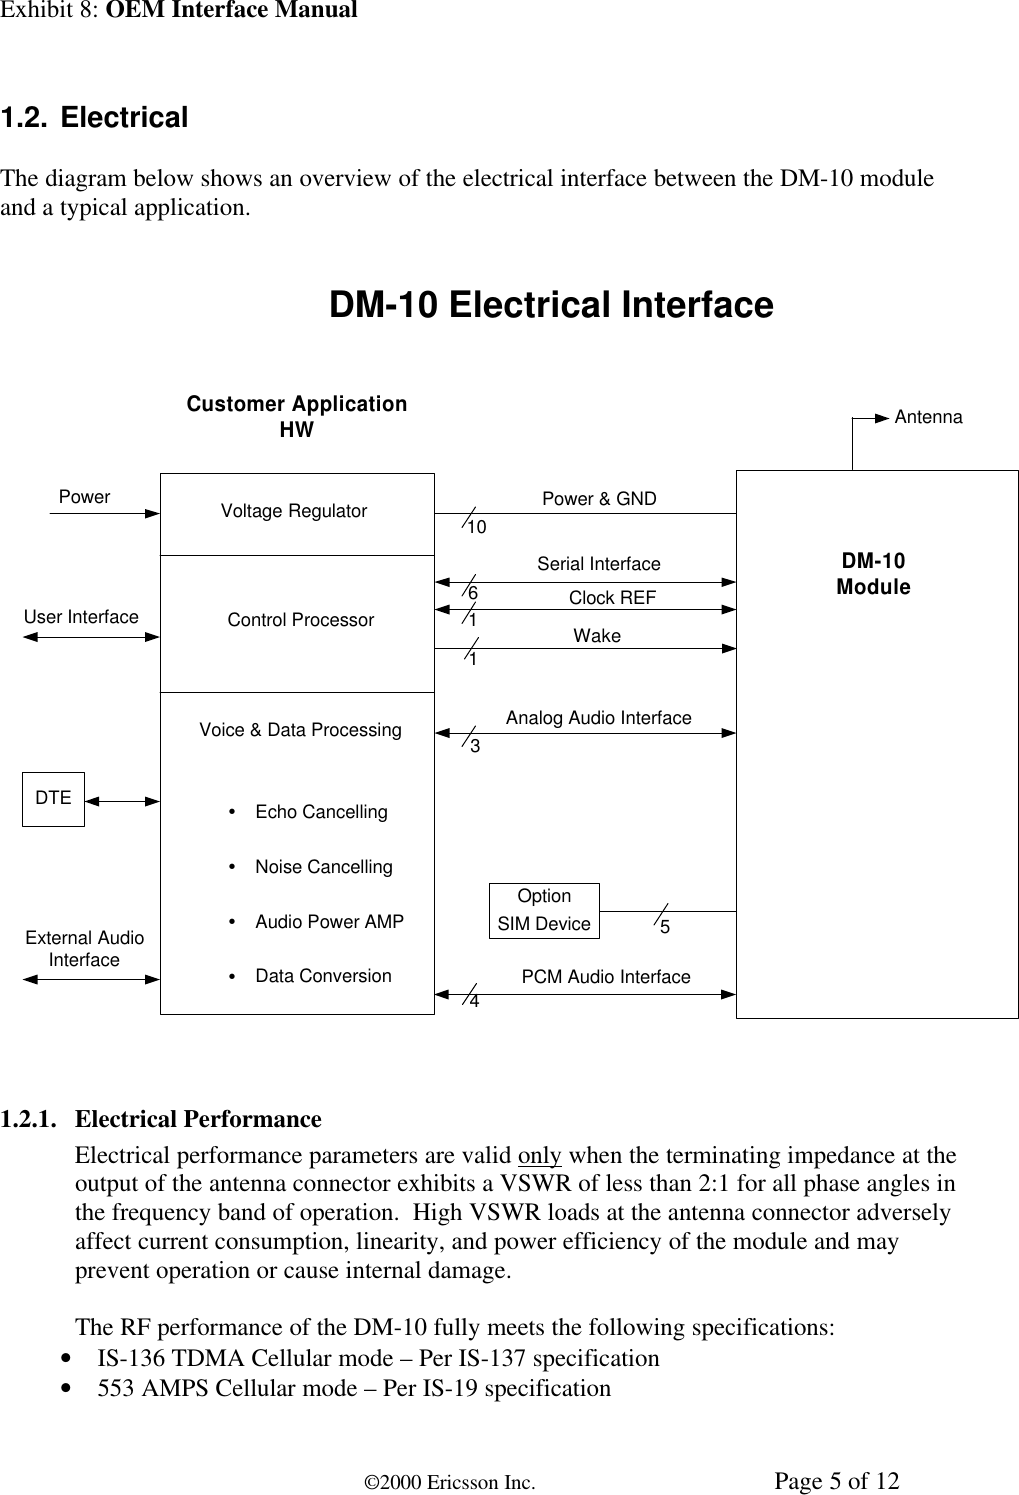 Exhibit 8: OEM Interface Manual©2000 Ericsson Inc. Page 5 of 121.2. ElectricalThe diagram below shows an overview of the electrical interface between the DM-10 moduleand a typical application.DM-10 Electrical InterfaceCustomer ApplicationHWVoltage RegulatorControl ProcessorVoice &amp; Data ProcessingŸEcho CancellingŸNoise CancellingŸAudio Power AMPŸData ConversionDTEPowerExternal AudioInterfaceAntennaUser Interface61Power &amp; GNDSerial InterfaceWakeAnalog Audio Interface101354Clock REFOptionSIM DeviceDM-10ModulePCM Audio Interface1.2.1. Electrical PerformanceElectrical performance parameters are valid only when the terminating impedance at theoutput of the antenna connector exhibits a VSWR of less than 2:1 for all phase angles inthe frequency band of operation.  High VSWR loads at the antenna connector adverselyaffect current consumption, linearity, and power efficiency of the module and mayprevent operation or cause internal damage.The RF performance of the DM-10 fully meets the following specifications:• IS-136 TDMA Cellular mode – Per IS-137 specification• 553 AMPS Cellular mode – Per IS-19 specification